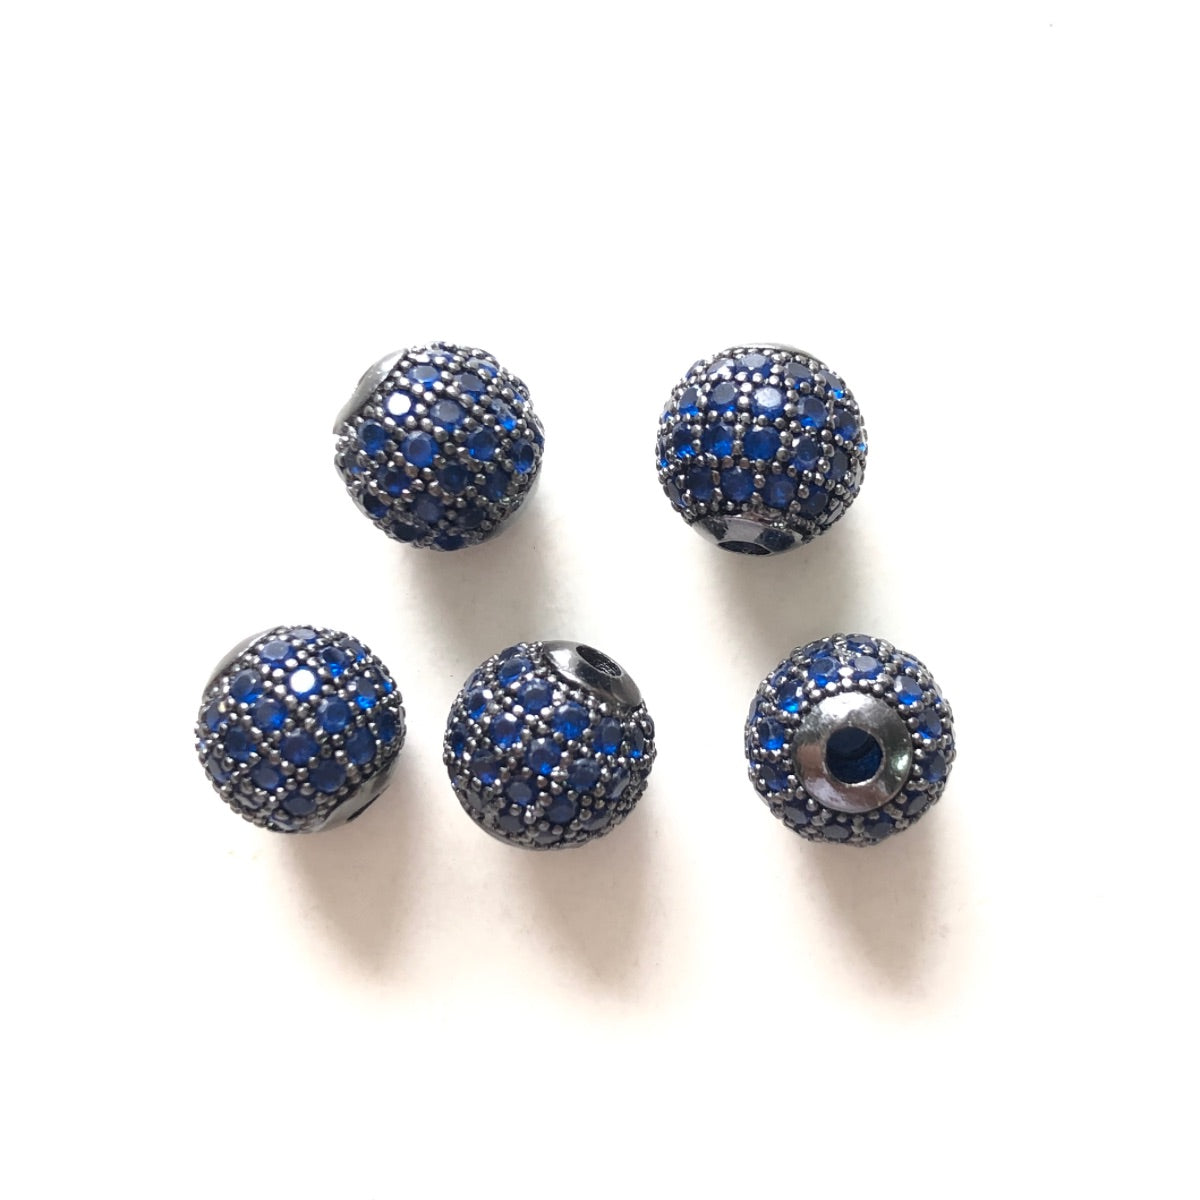 10pcs/lot 6mm, 8mm Colorful CZ Paved Ball Spacers Black Blue CZ Paved Spacers 6mm Beads 8mm Beads Ball Beads Colorful Zirconia New Spacers Arrivals Charms Beads Beyond